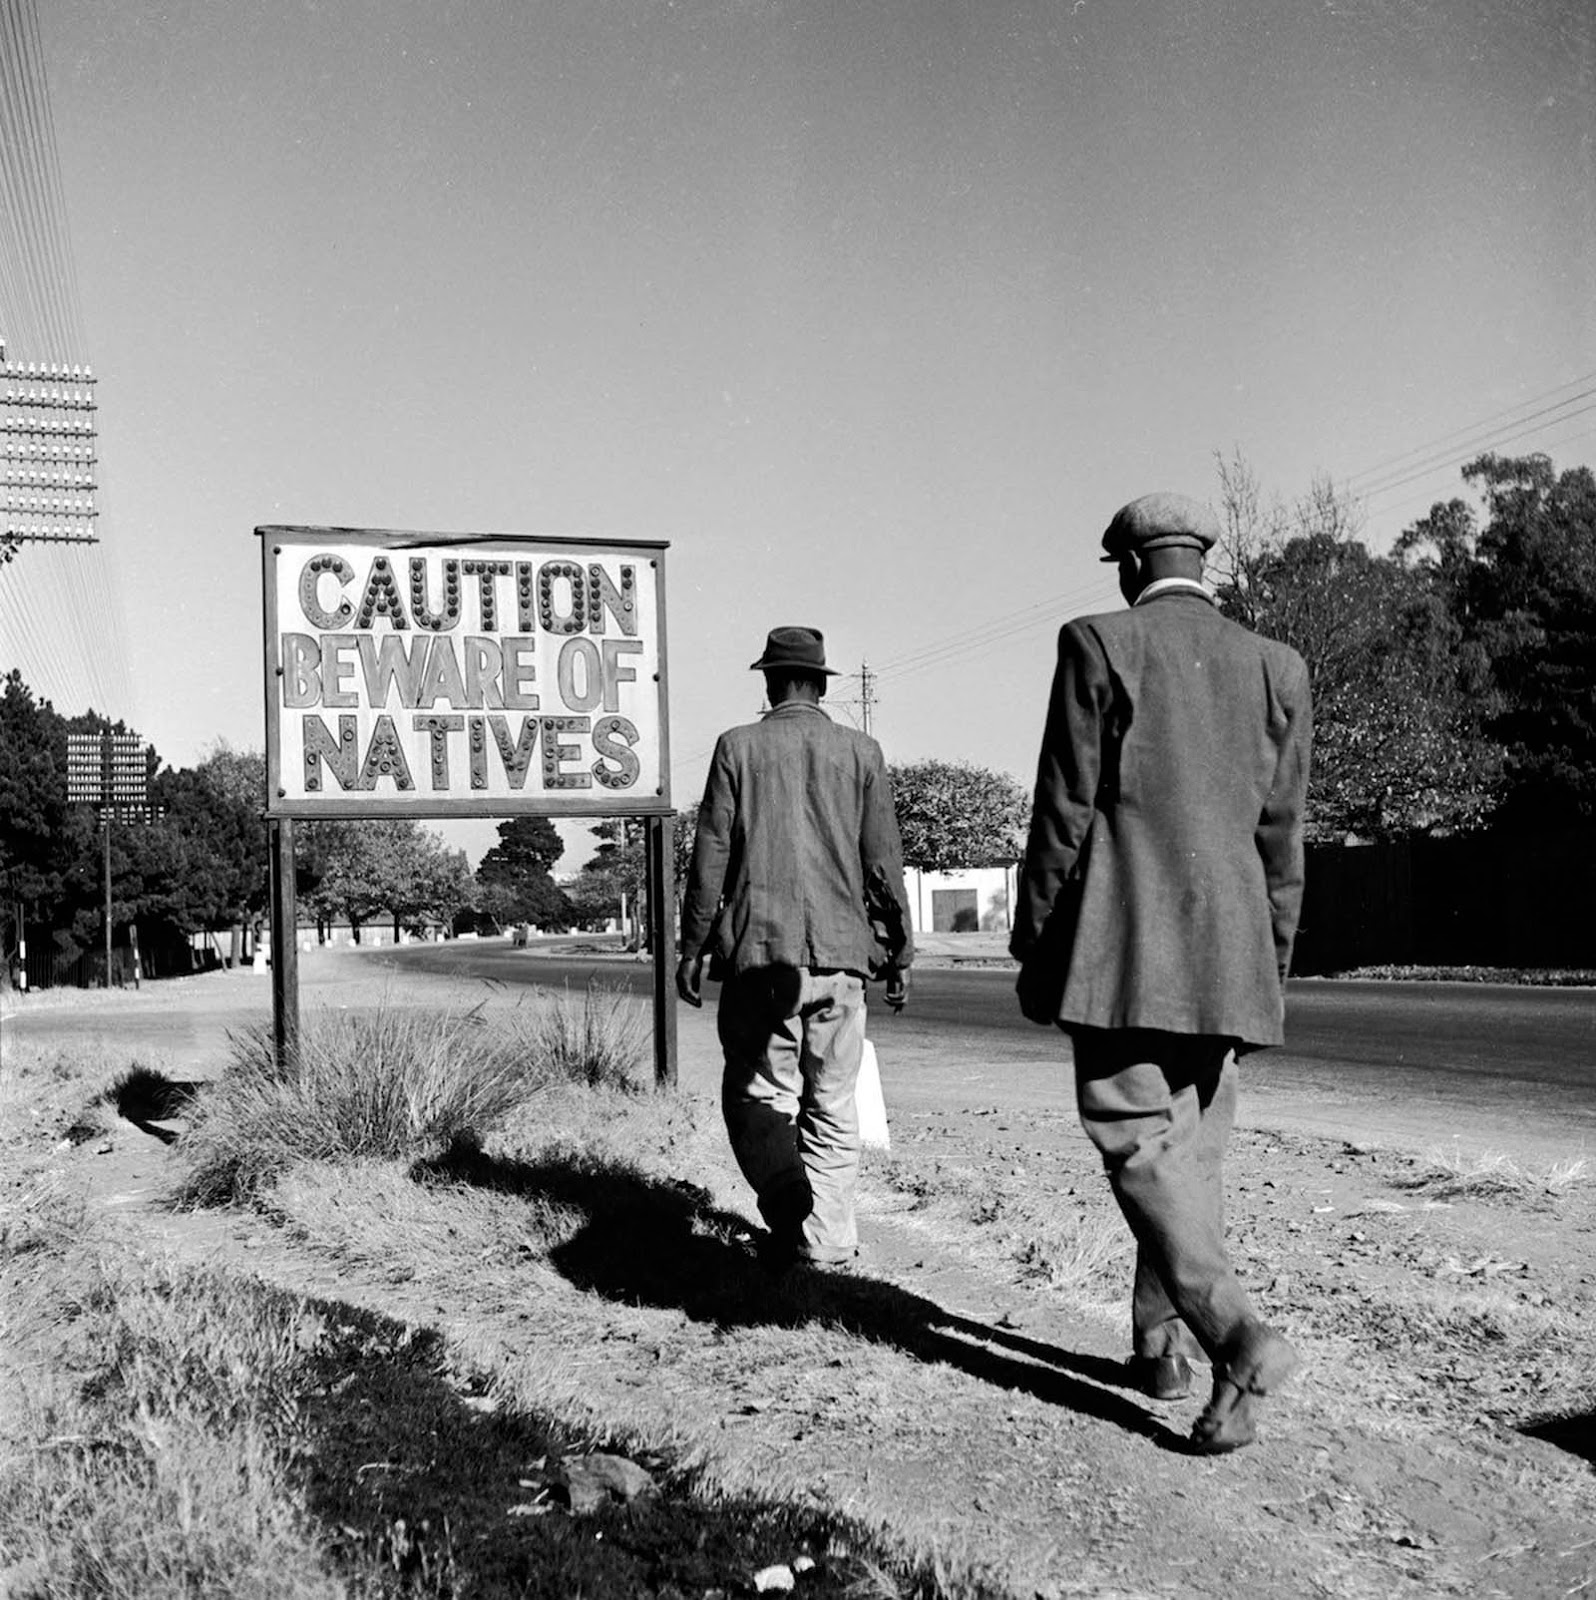 A sign common in Johannesburg. 1956.